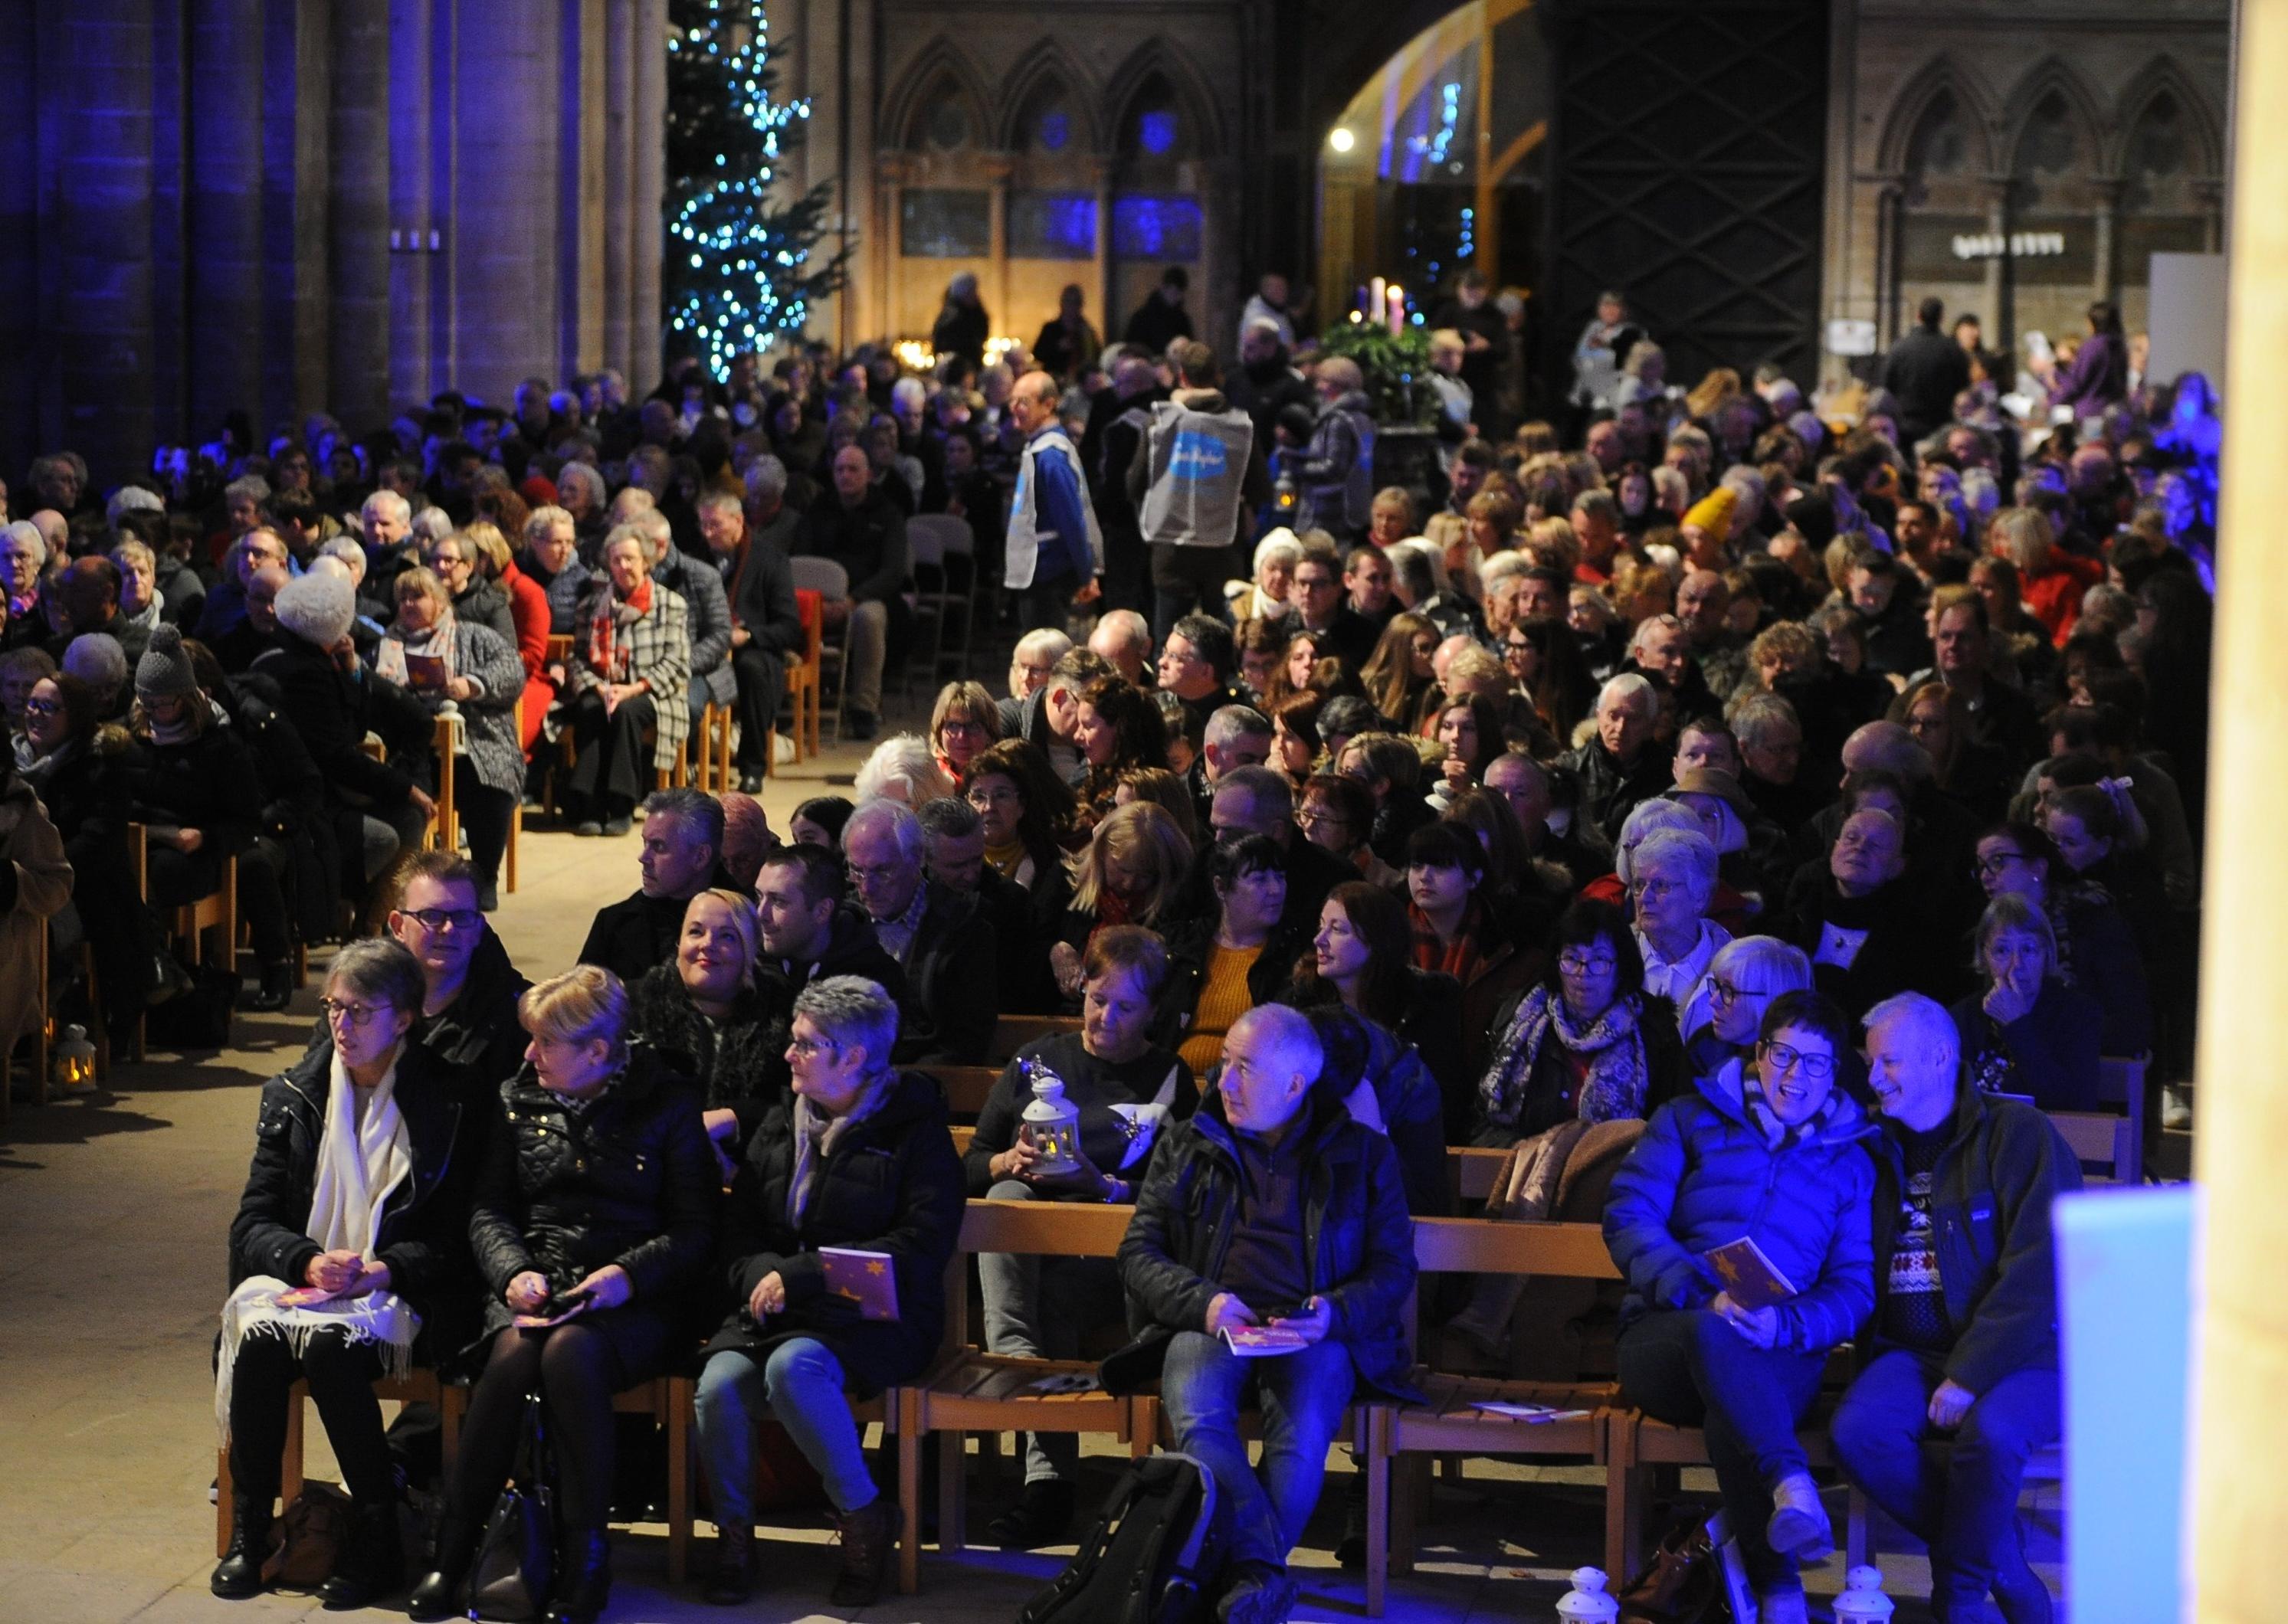 Sue Ryder Lights of Love service at Peterborough Cathedral. EMN-191215-215839009